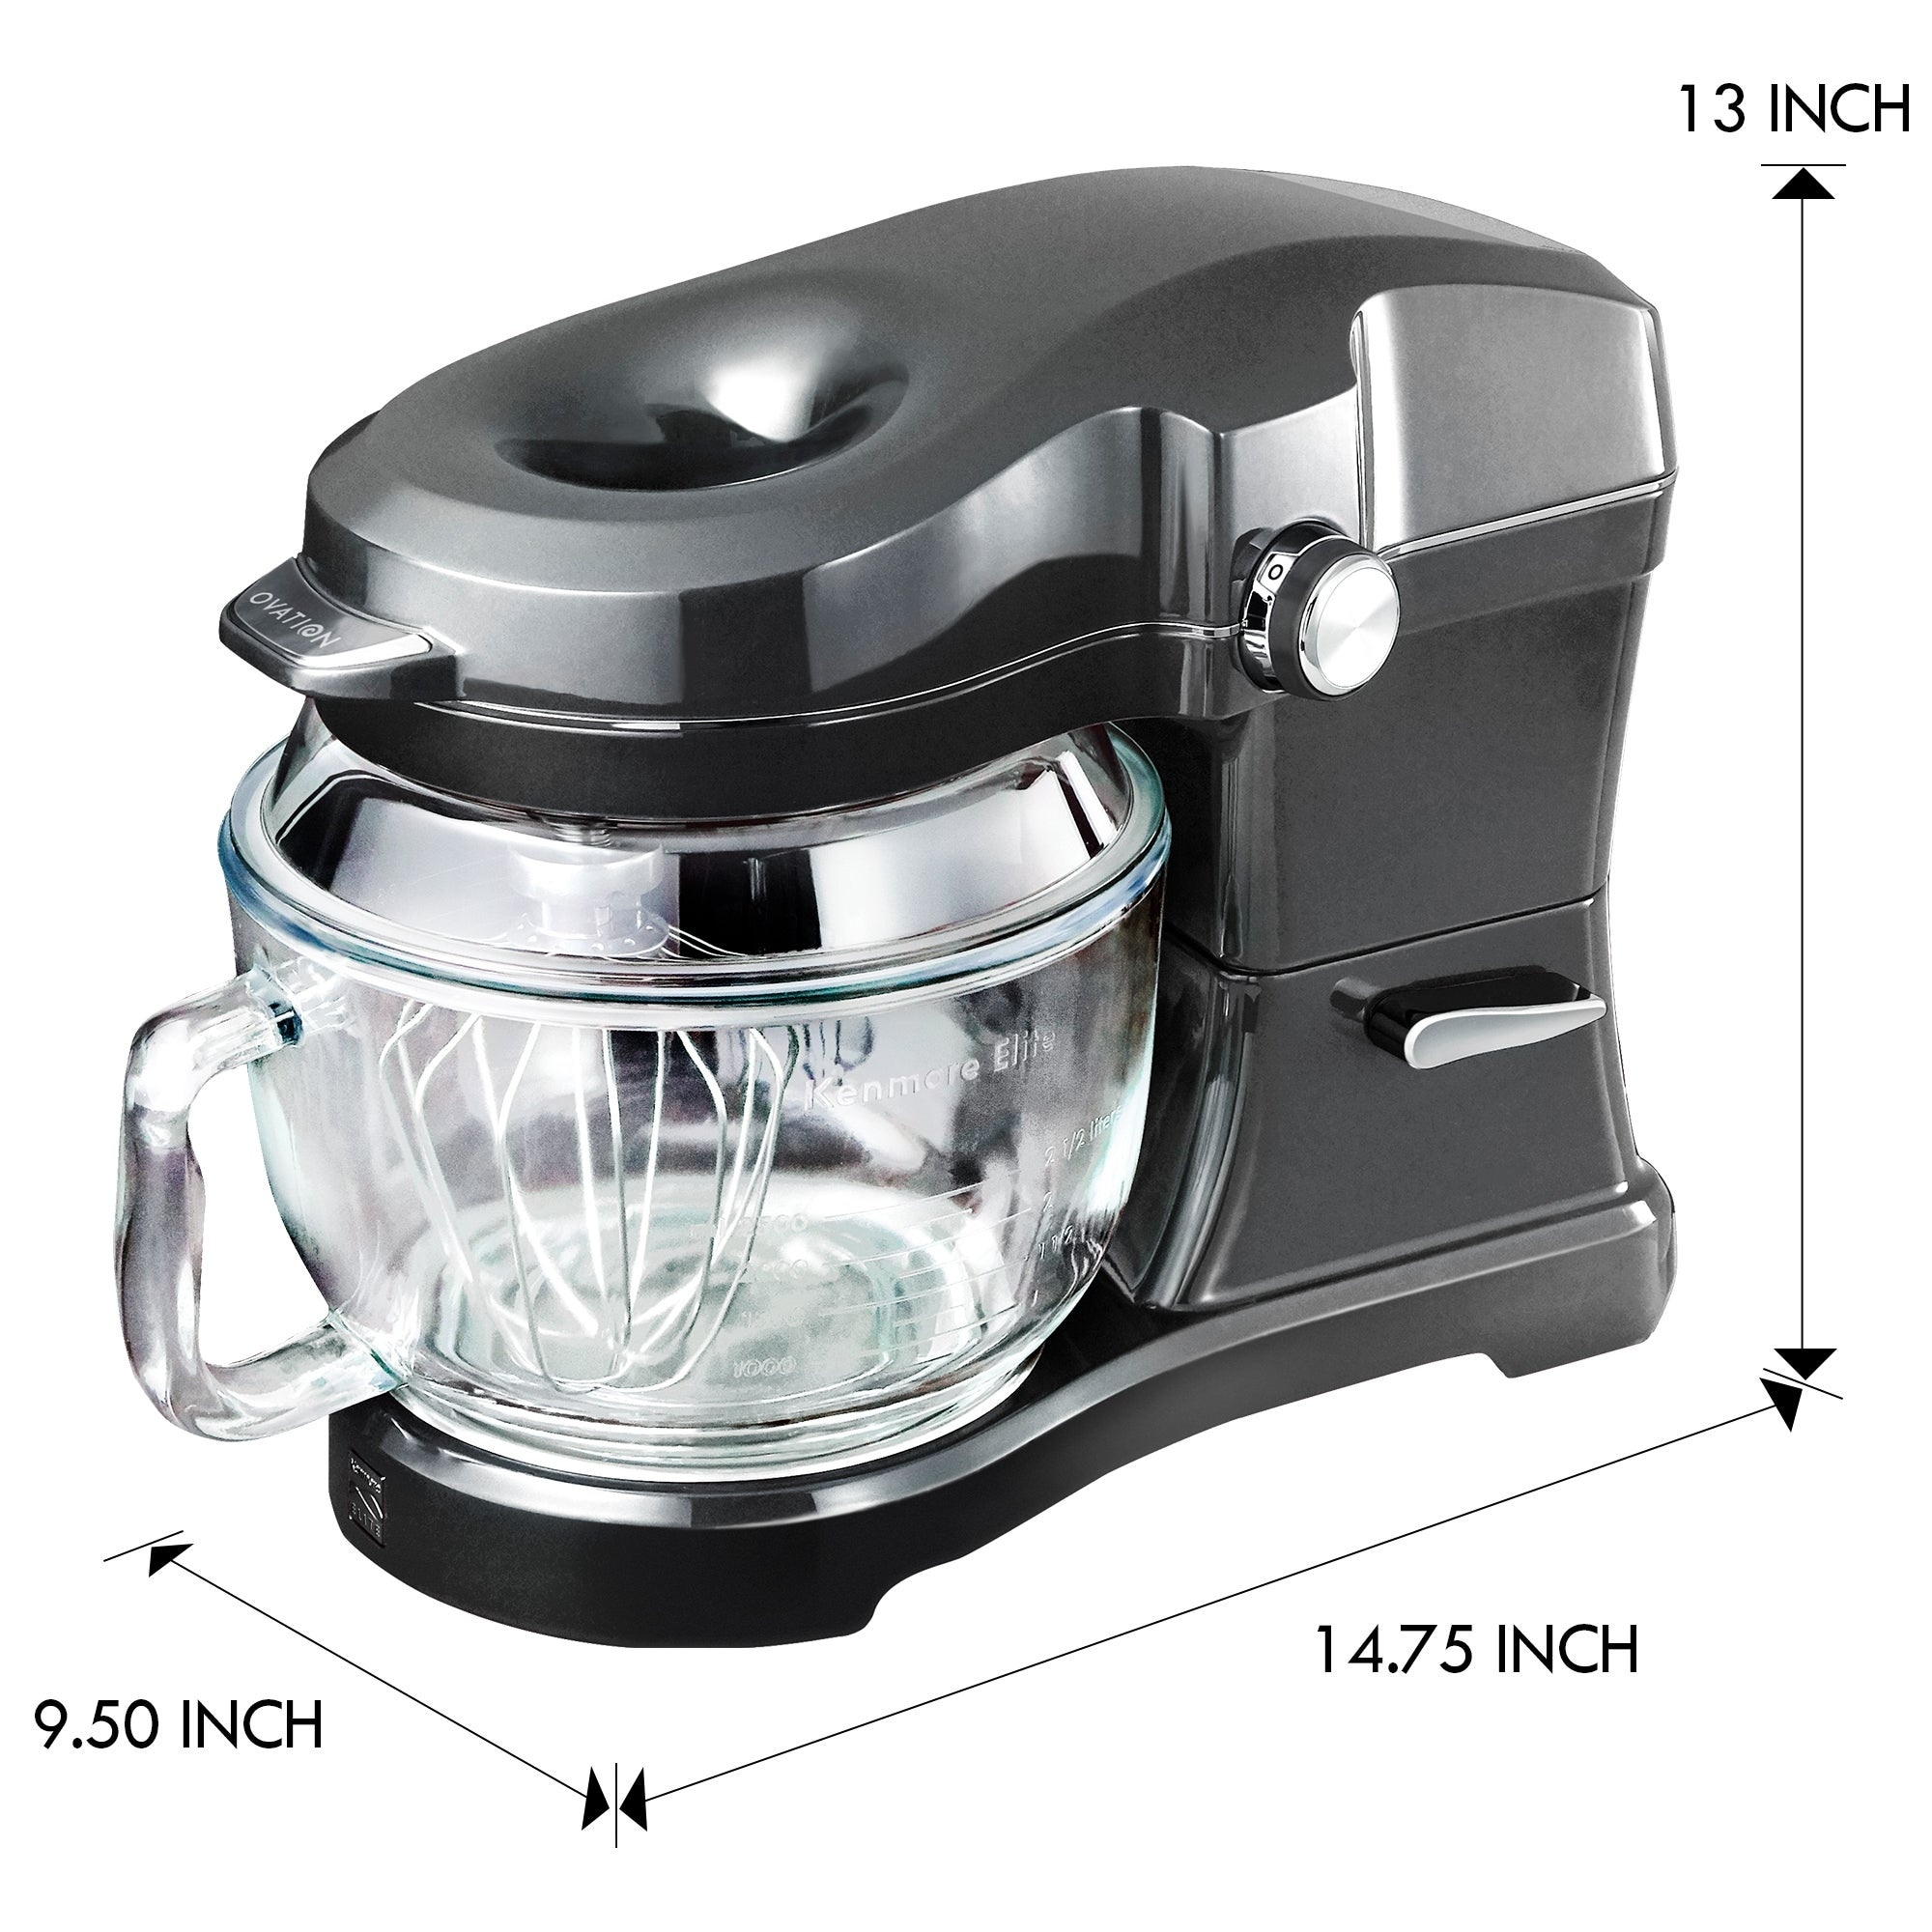 https://ak1.ostkcdn.com/images/products/is/images/direct/91f9e6515996091bca8271b3d3d6e548c4d5ac05/Kenmore-Elite-Ovation-5-Qt-Stand-Mixer%2C-500W-10-Speed%2C-Pour-In-Top%2C-Beater%2C-Whisk%2C-Dough-Hook.jpg